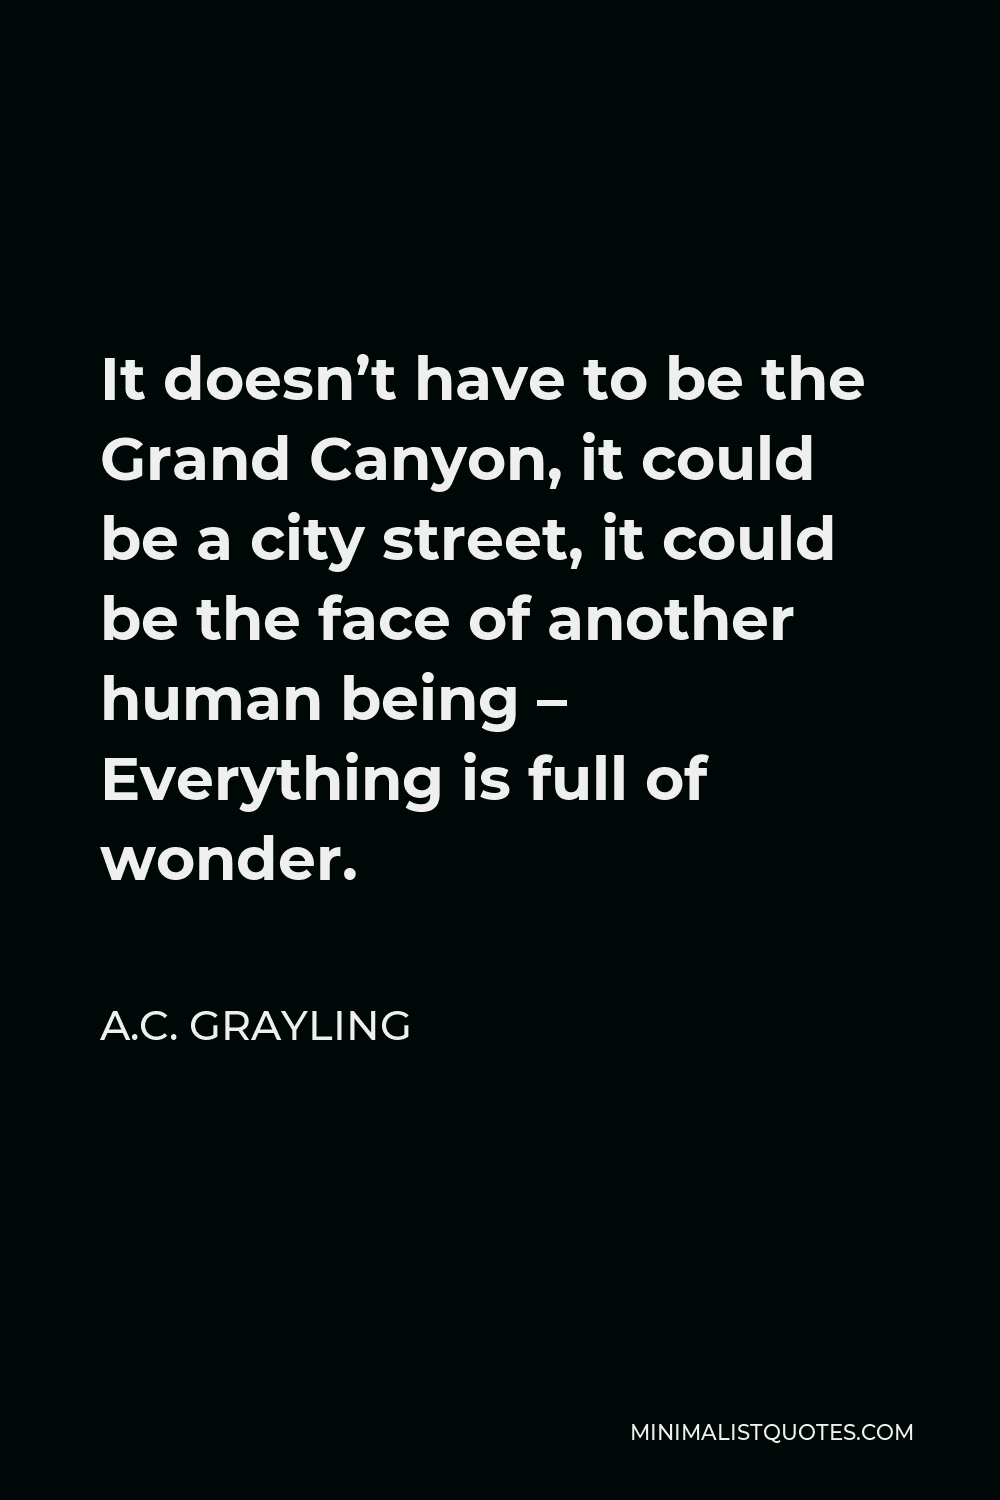 A.C. Grayling Quote - It doesn’t have to be the Grand Canyon, it could be a city street, it could be the face of another human being – Everything is full of wonder.